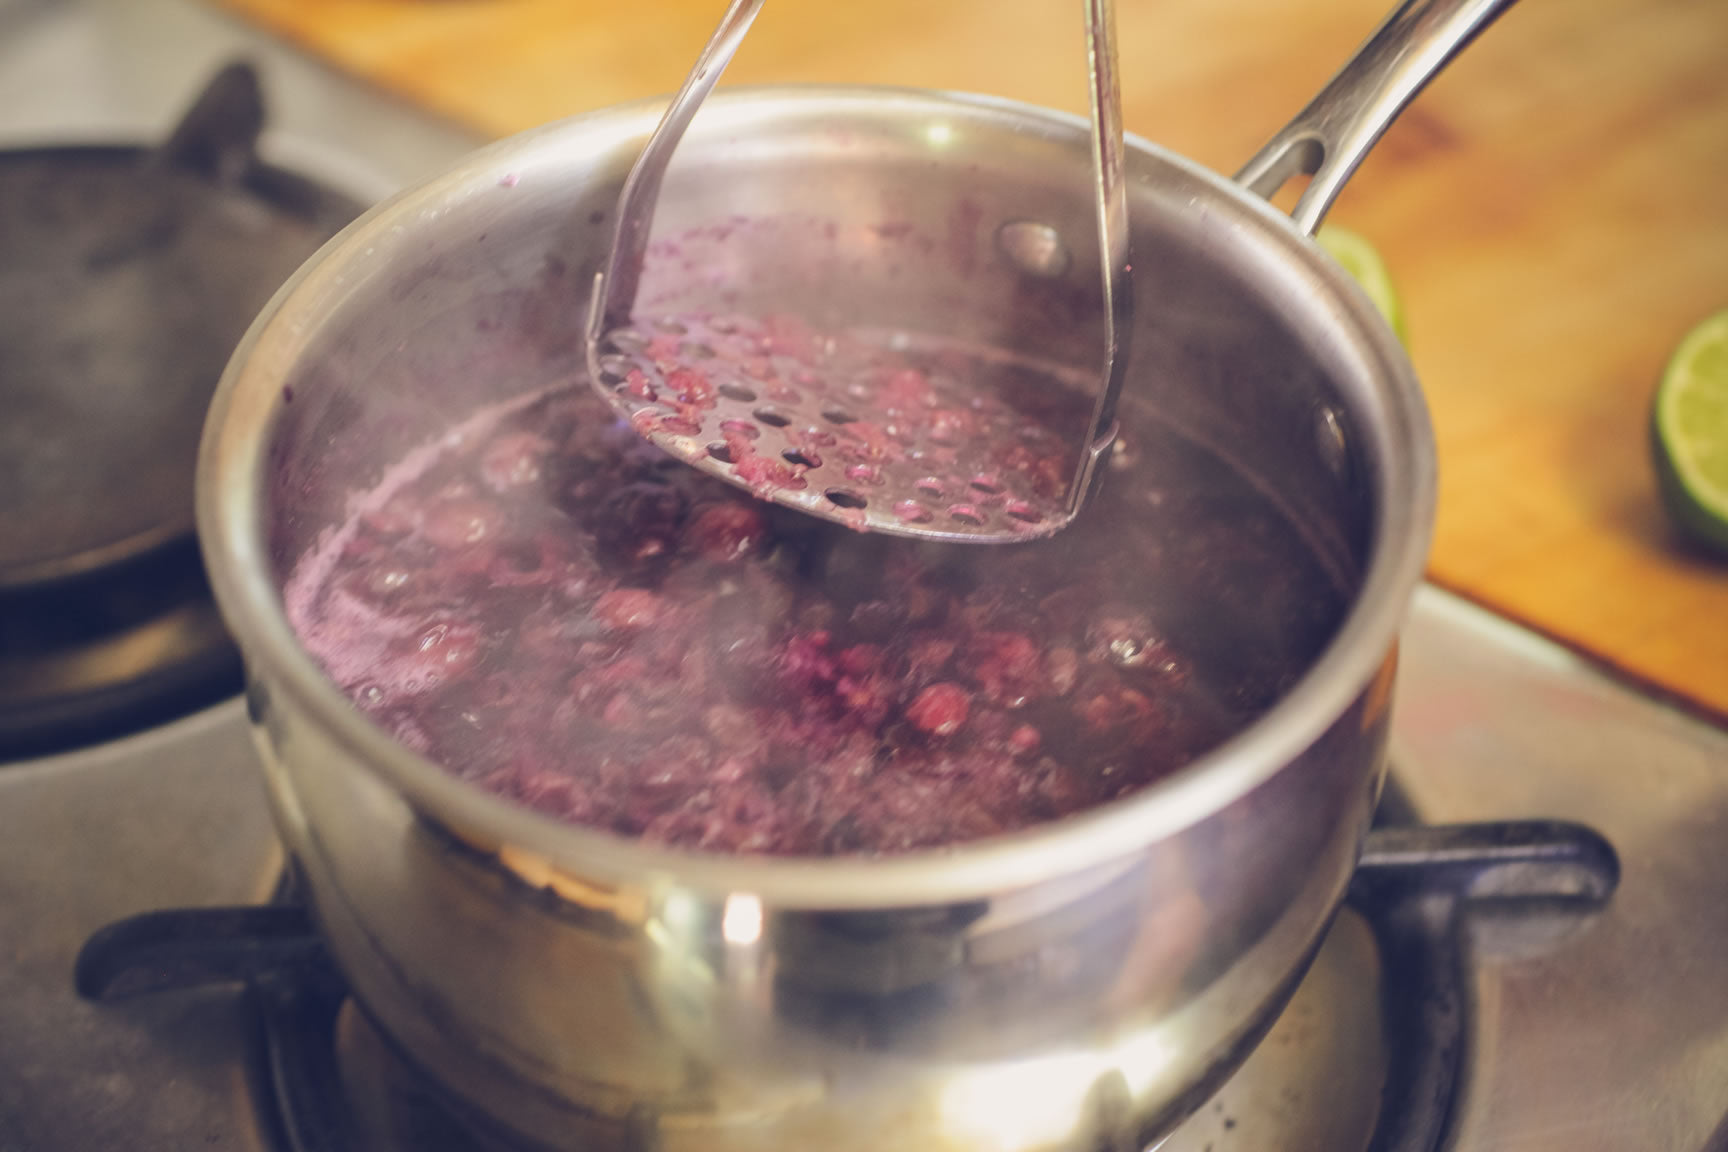 mash berries while cooking